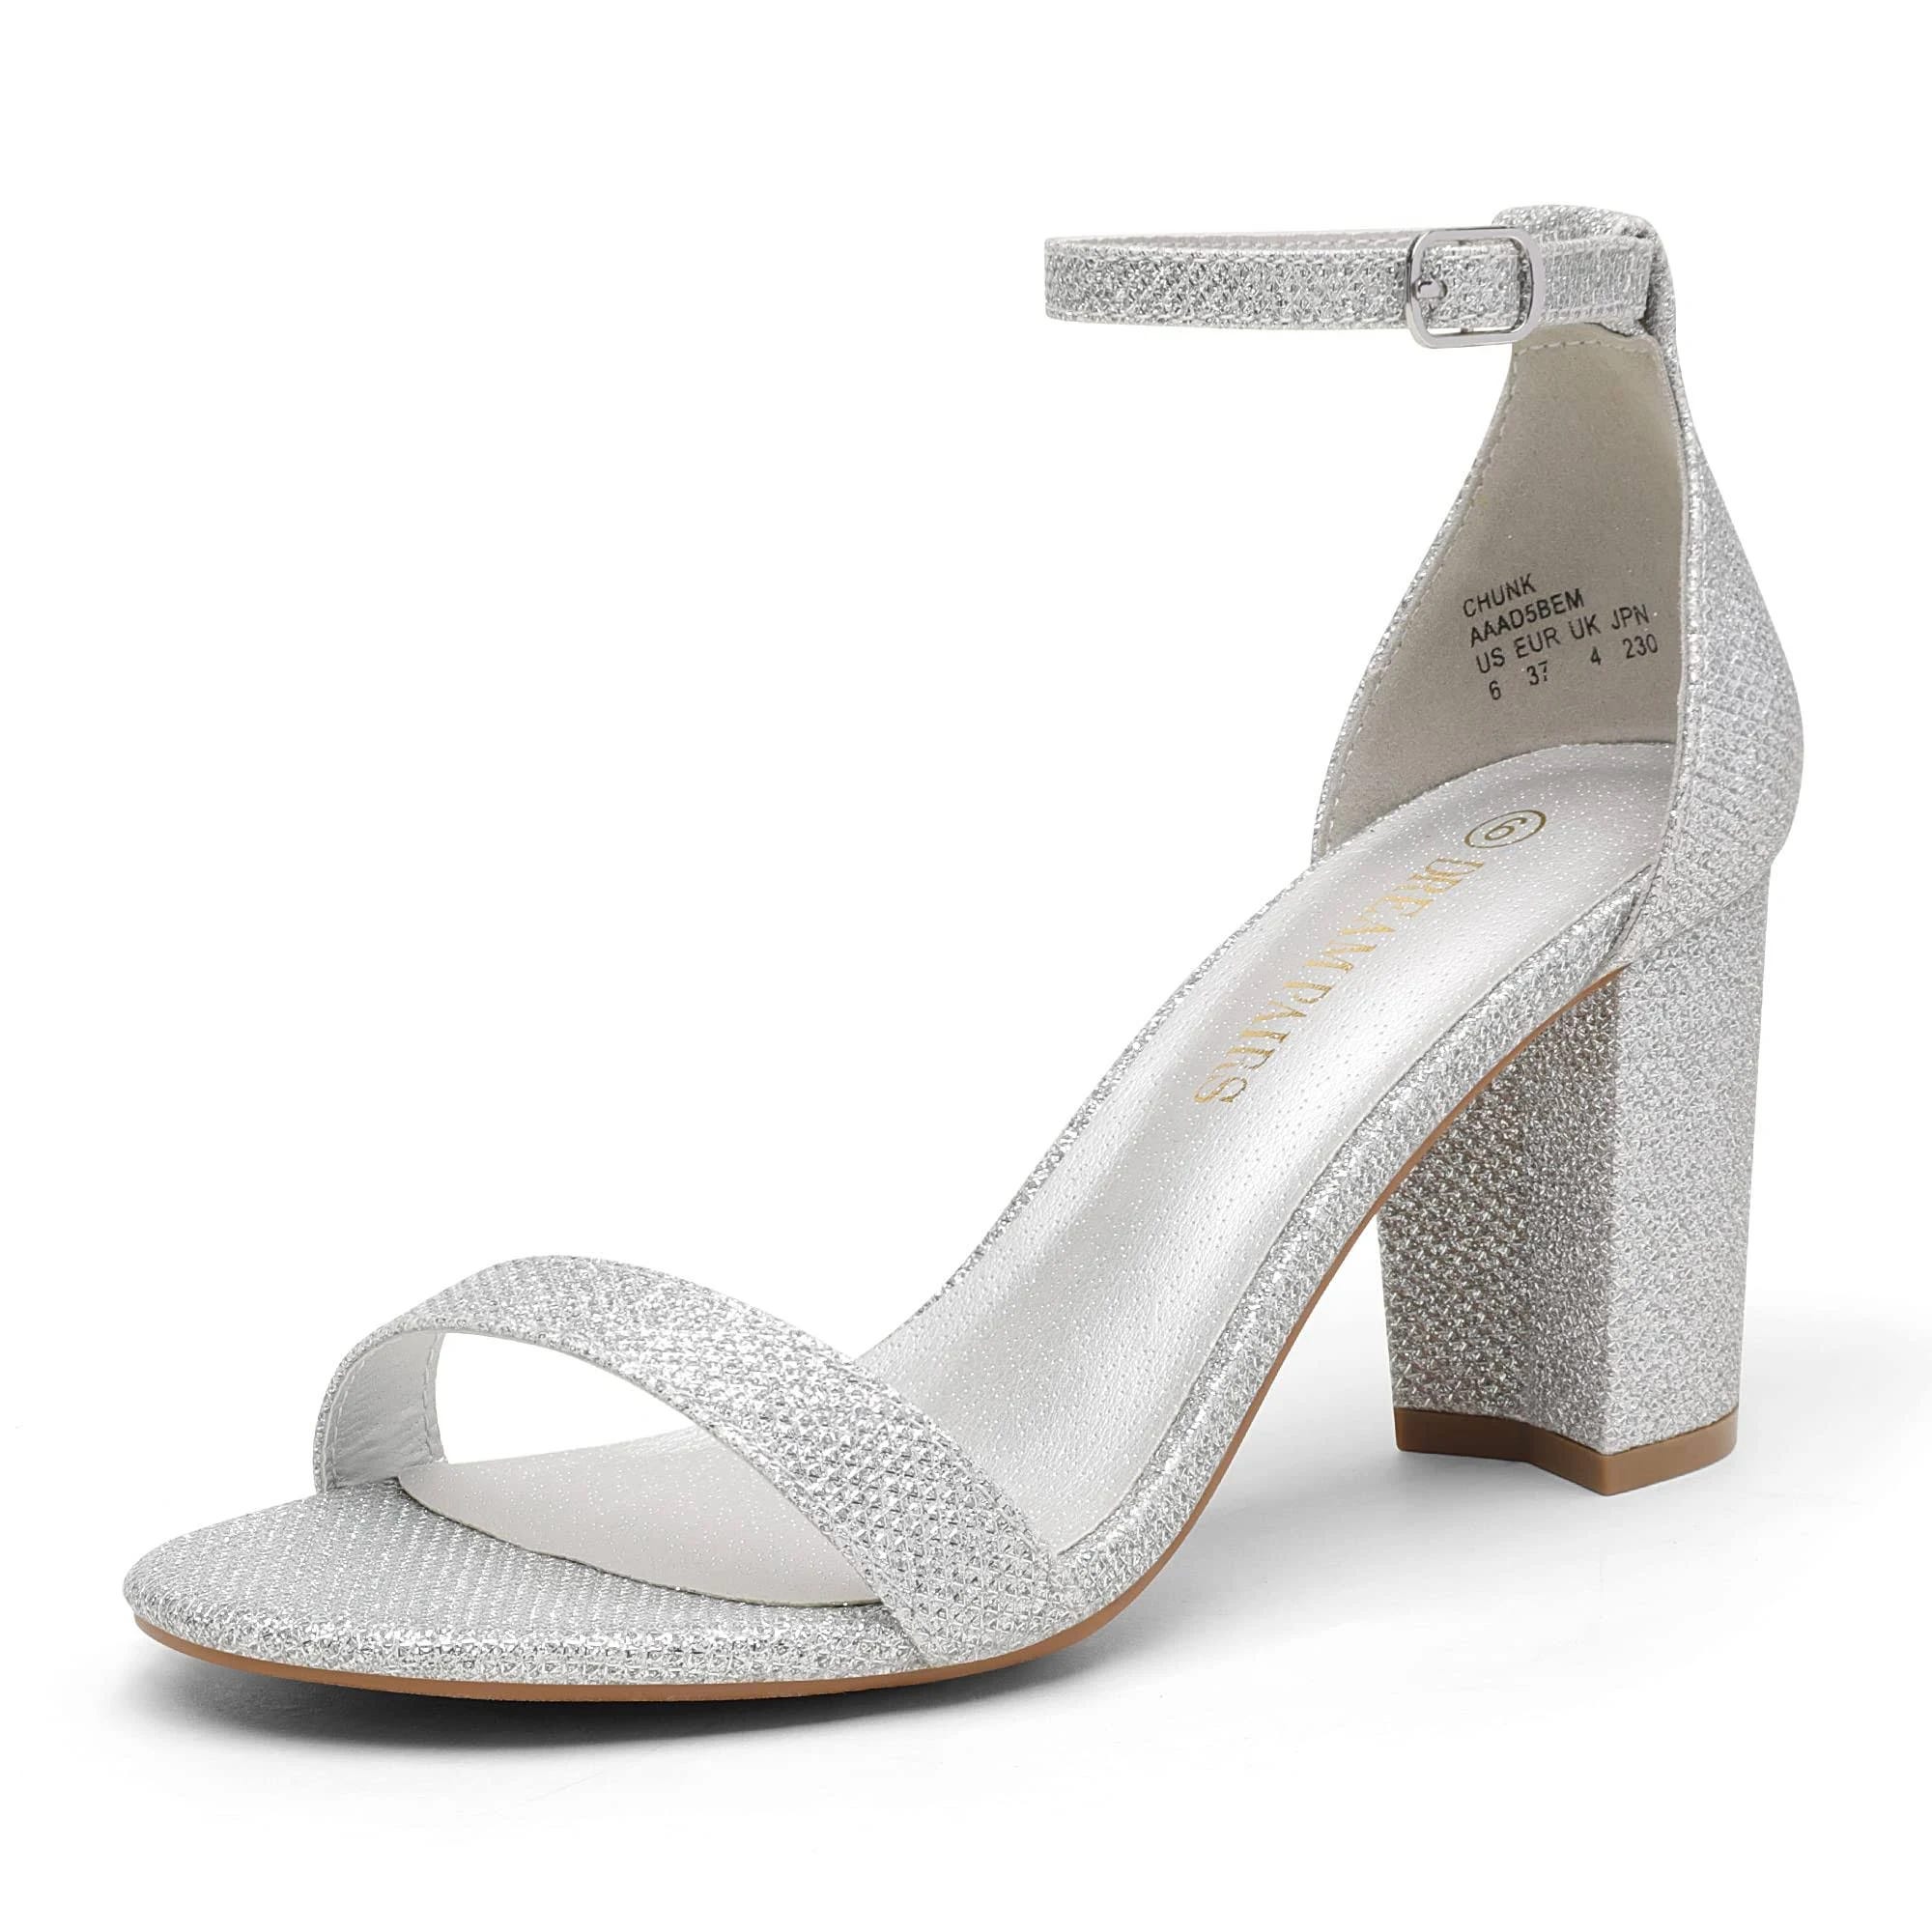 Dream Pairs Women's Buckle Heels: Comfortable, Chic Silver Sandals | Image